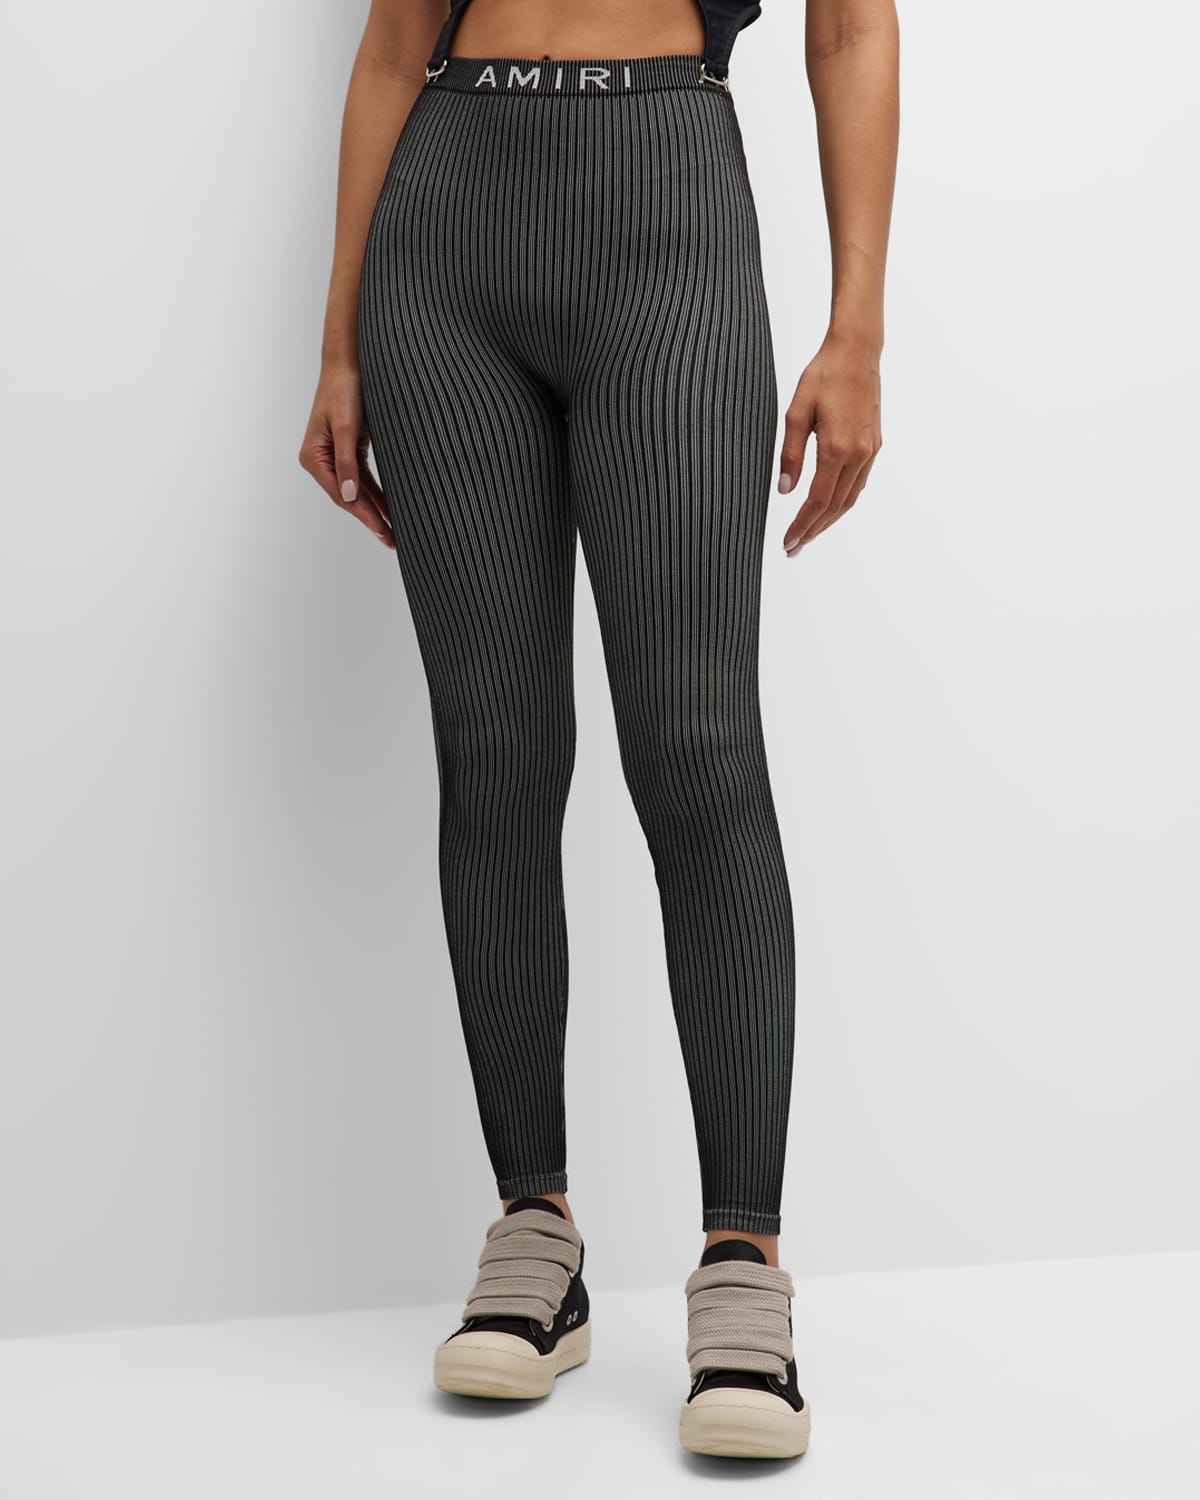 Amiri Knit Leggings With Branded Waistband In Black